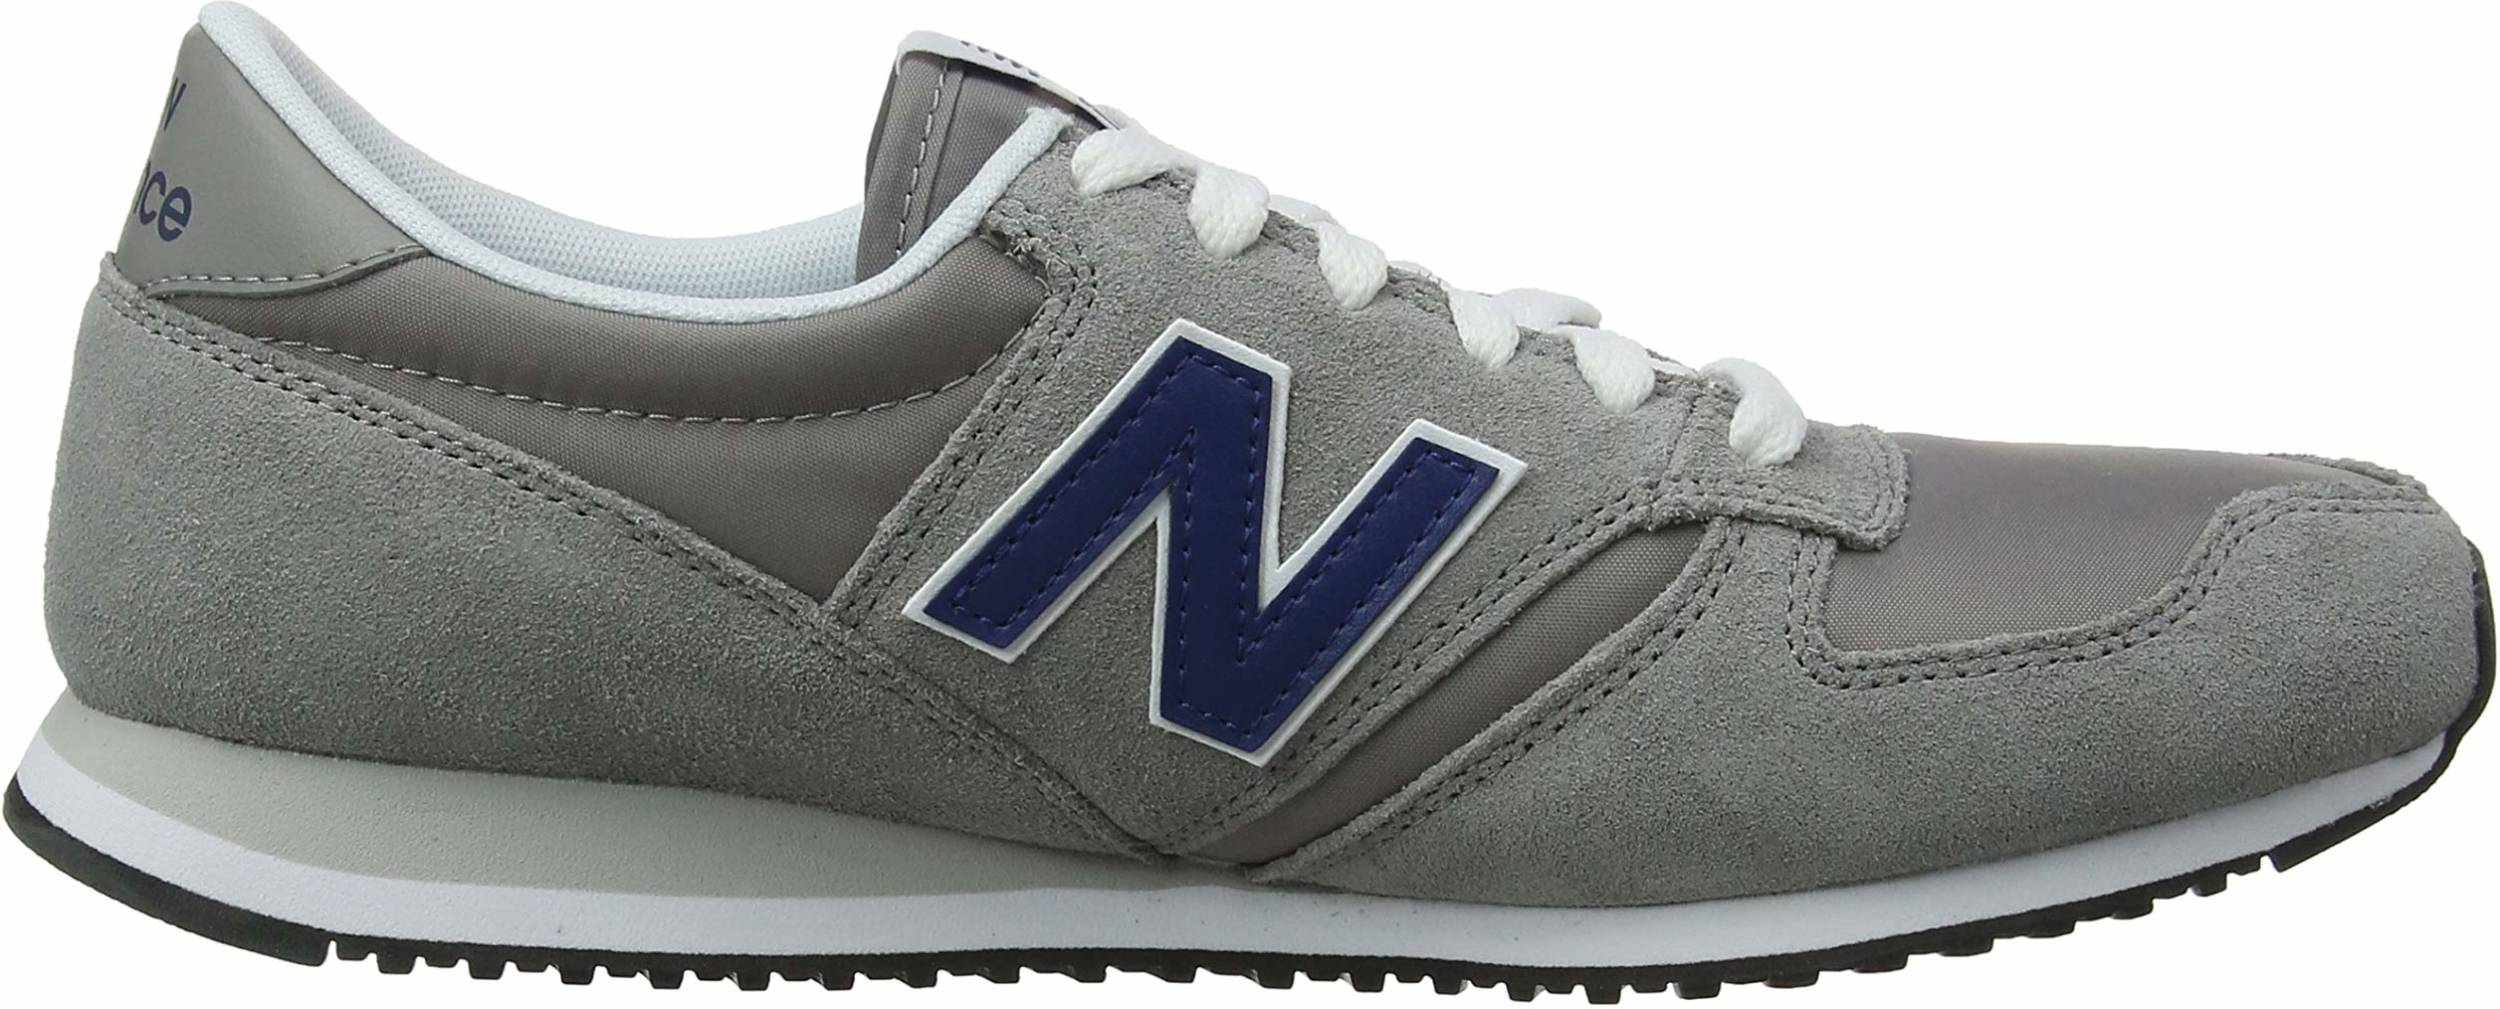 New Balance 420 sneakers in 5 colors (only $36) | RunRepeat